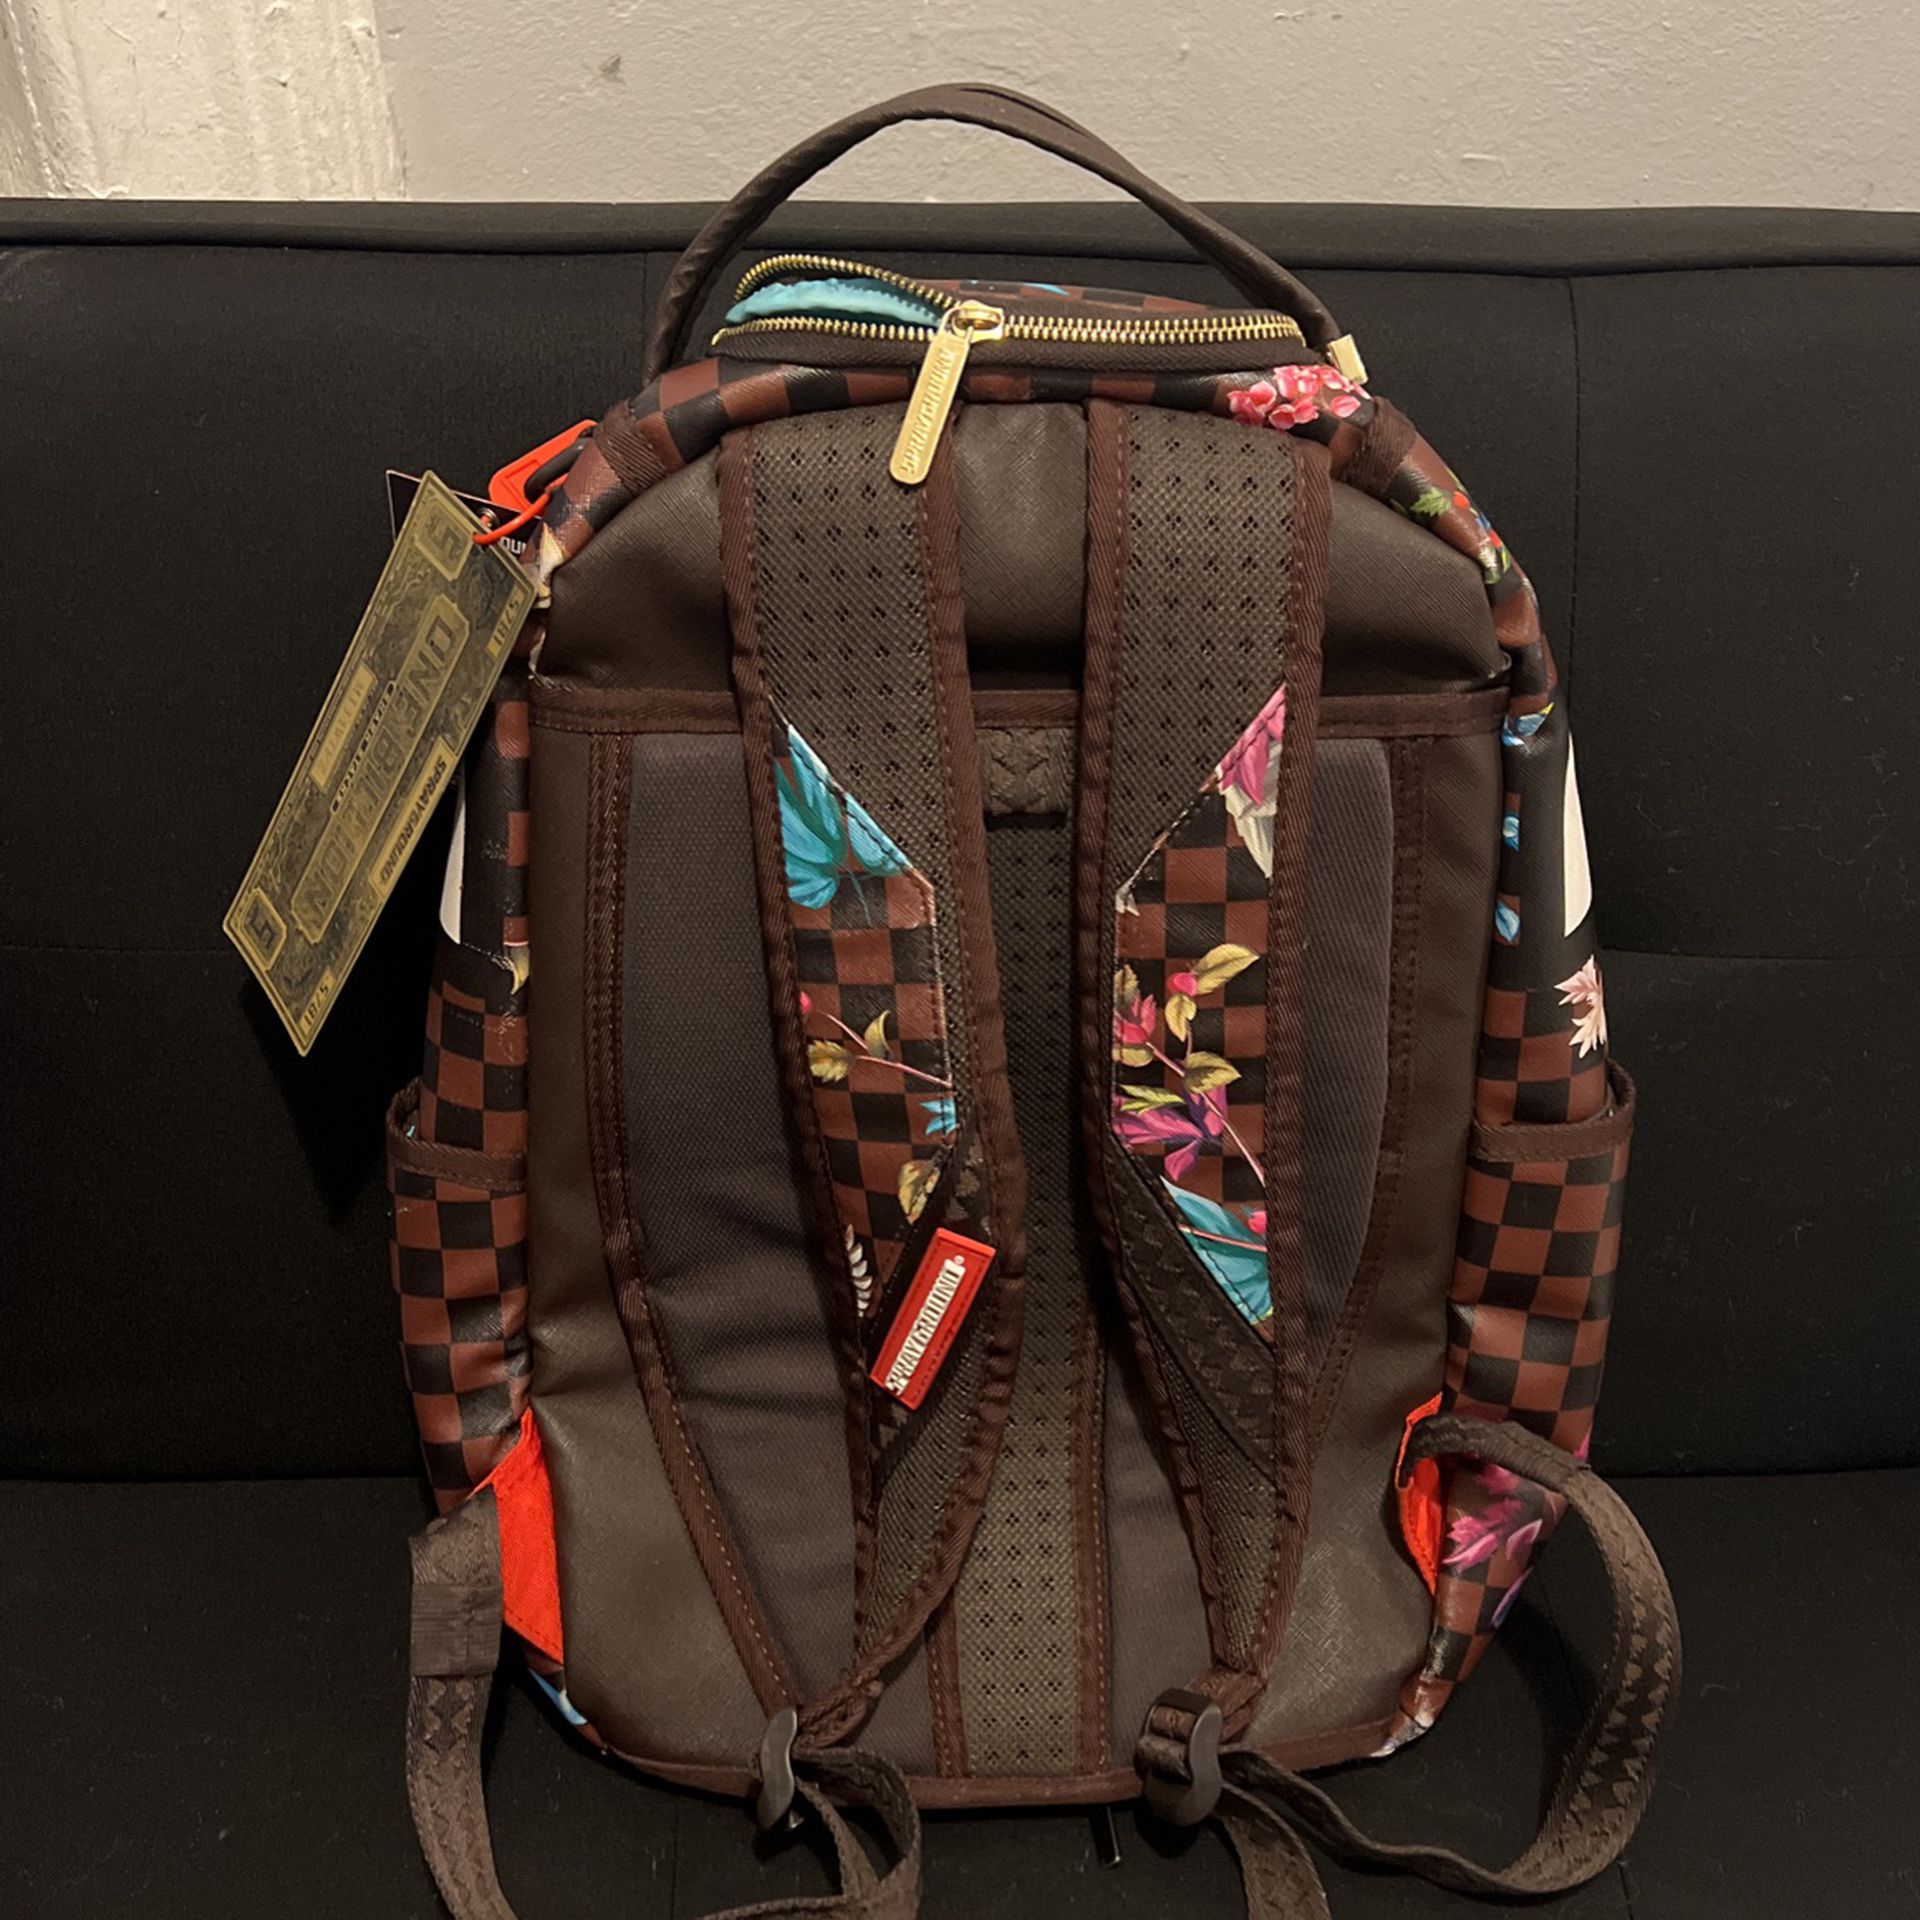 Spray gram Book bag for Sale in Brooklyn, NY - OfferUp